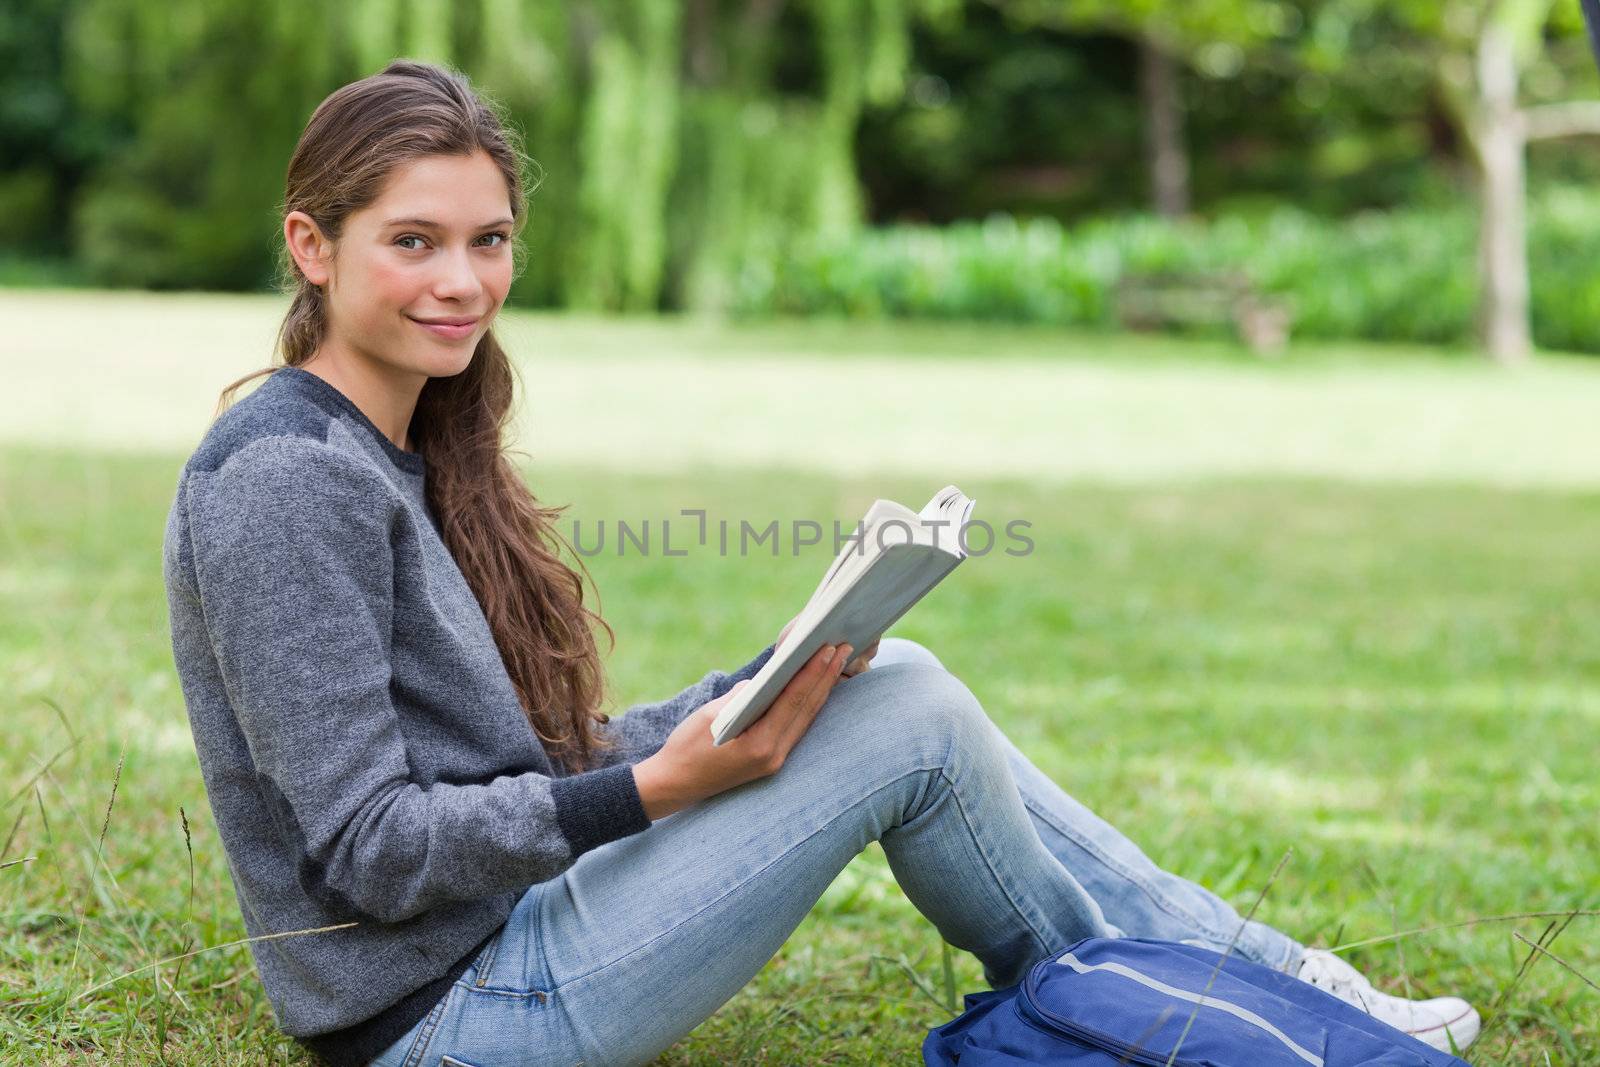 Smiling girl holding a book on her knees while sitting on the grass in the countryside